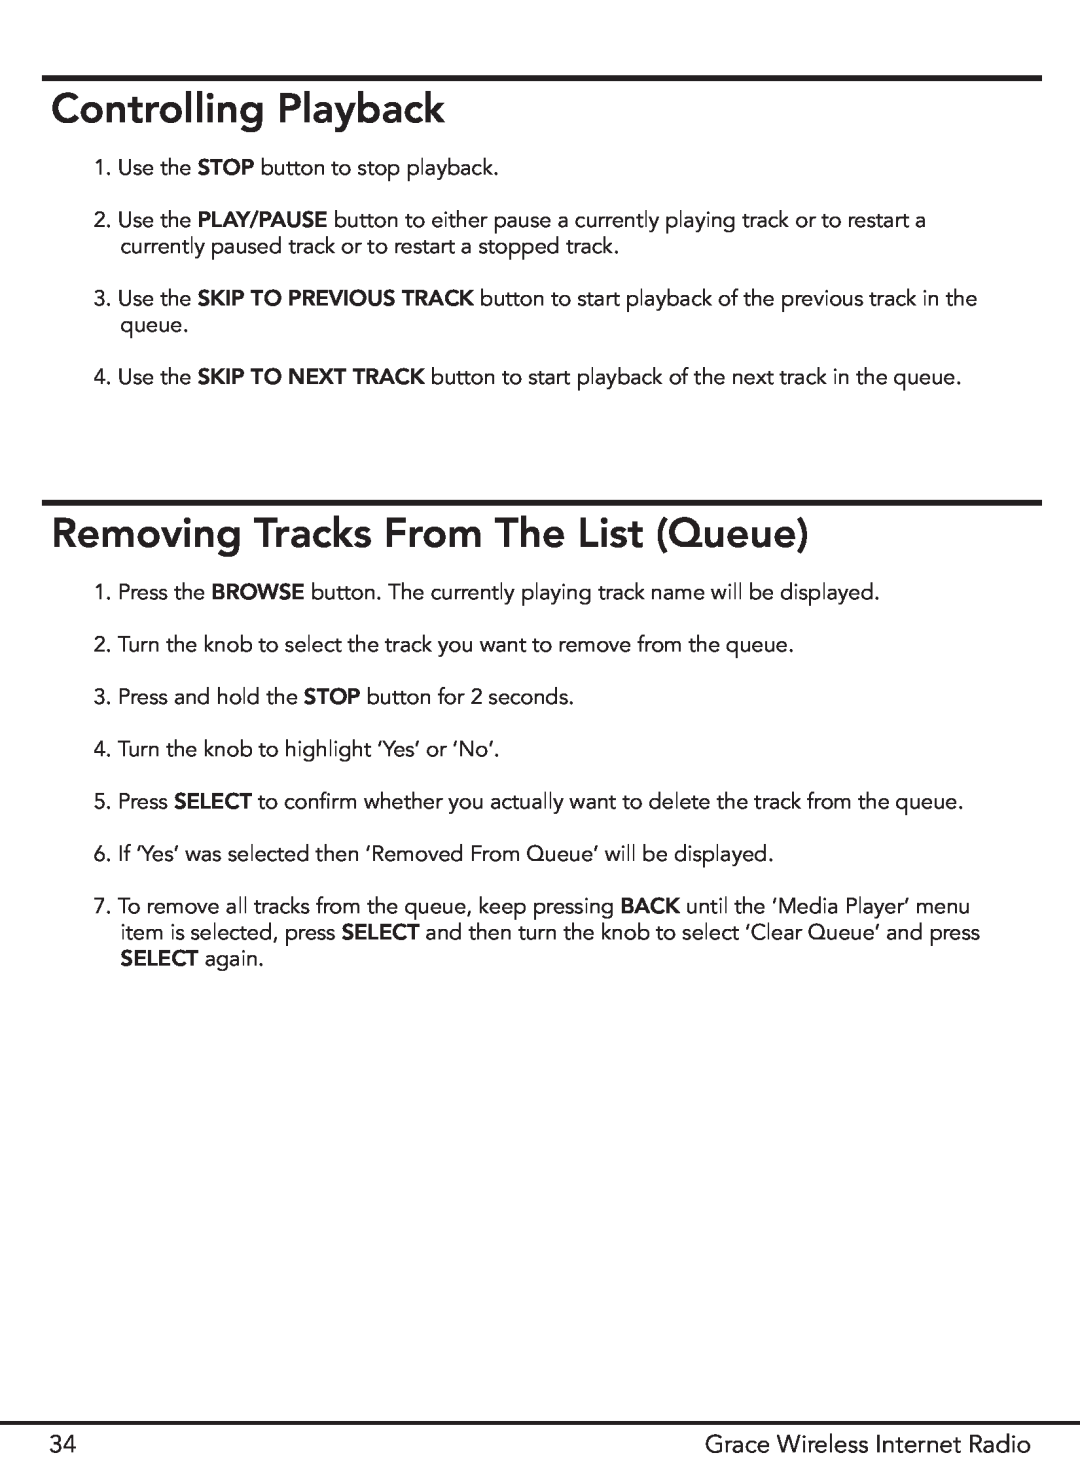 Grace GDI-IR2000 manual Controlling Playback, Removing Tracks From The List Queue 